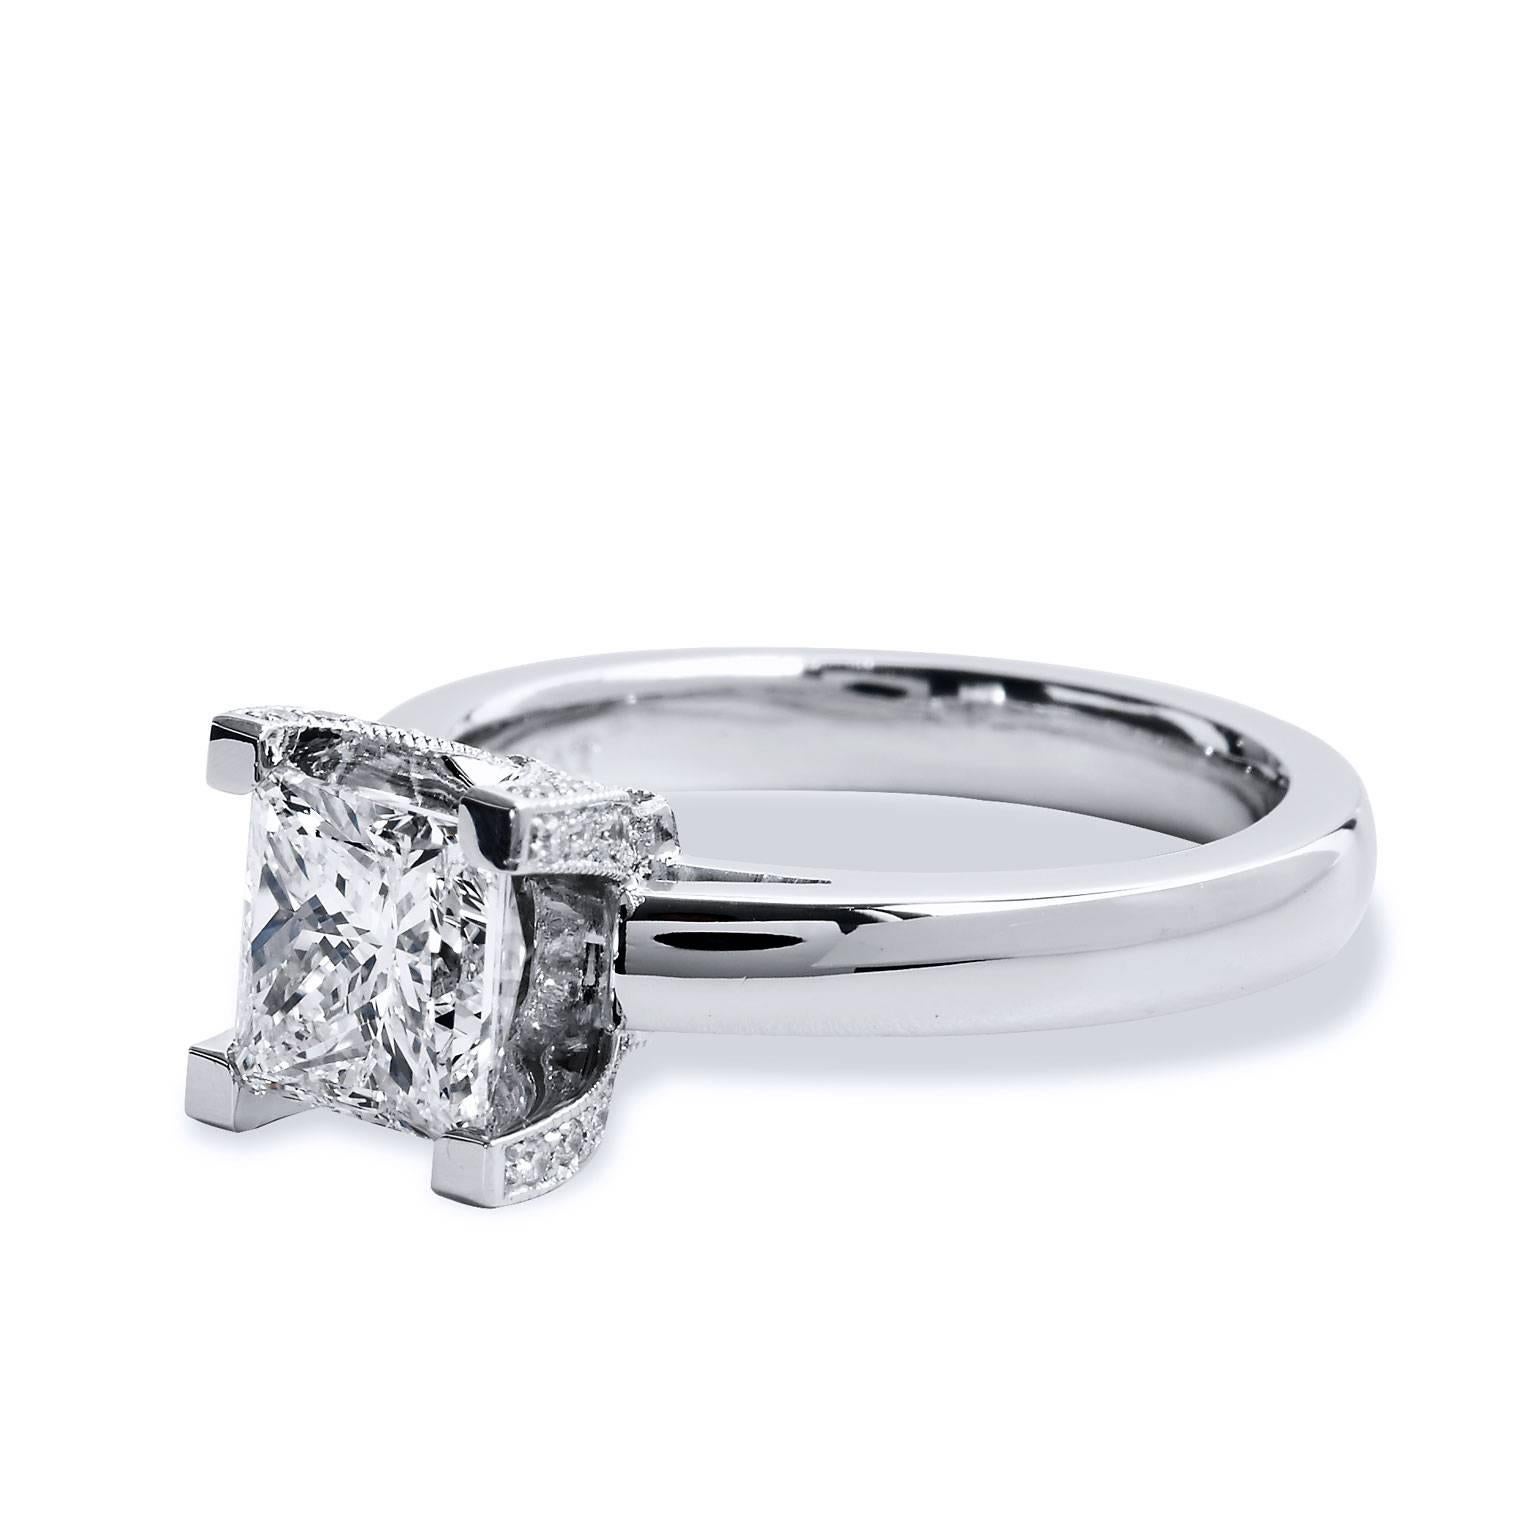 Crafted in platinum, this engagement ring features a 1.70ct H VVS2 Princess cut diamond. The solitaire diamond is set in a pave prong design. The ring is complete with .21ct of fine G/H VS diamonds set pave on each prong for elevated beauty. This is